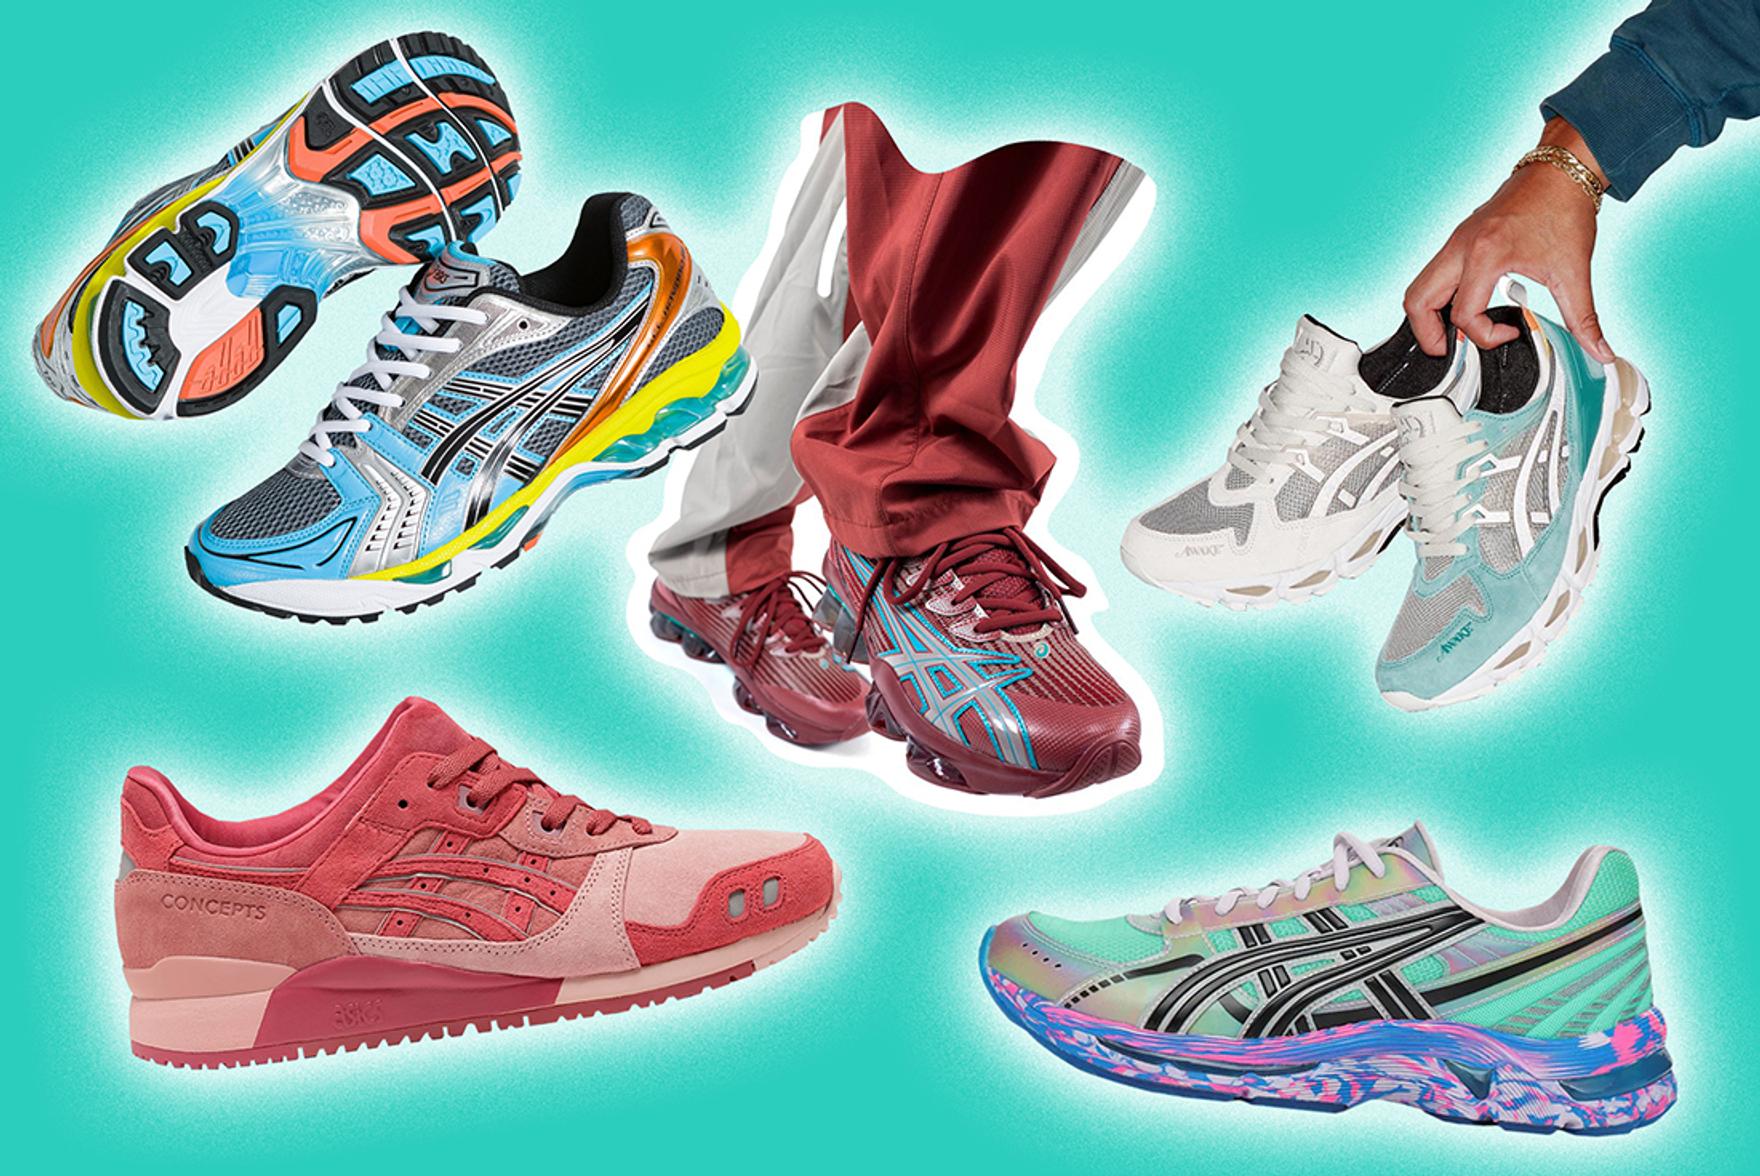 The Top ASICS Releases of 2021